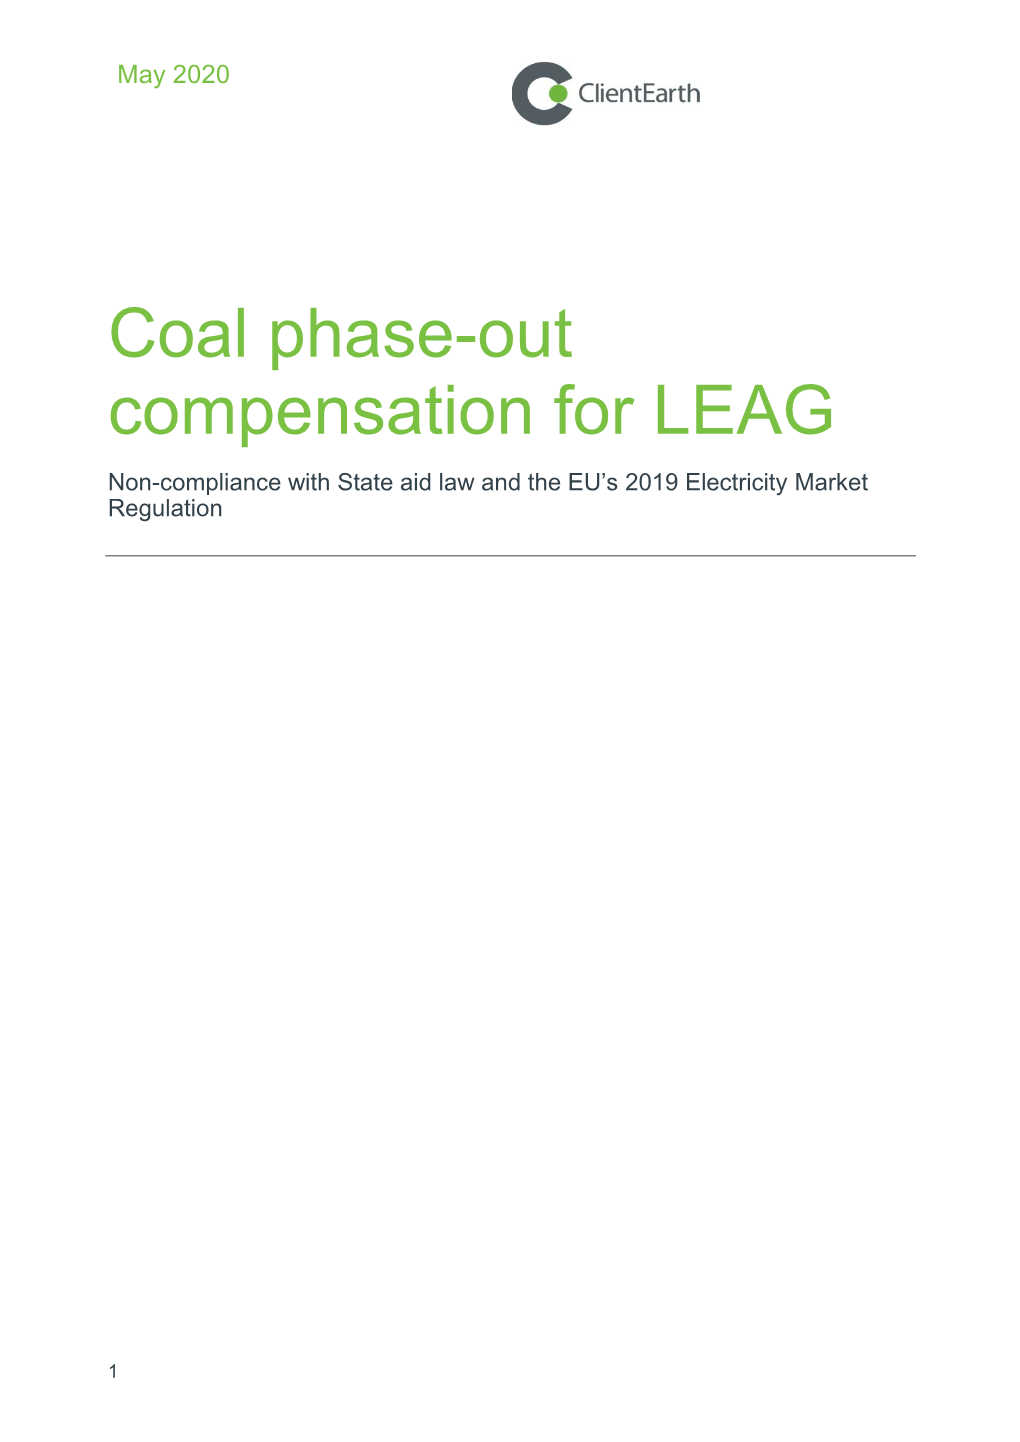 Coal Phase-Out Compensation for LEAG Non-Compliance with State Aid Law and the EU’S 2019 Electricity Market Regulation